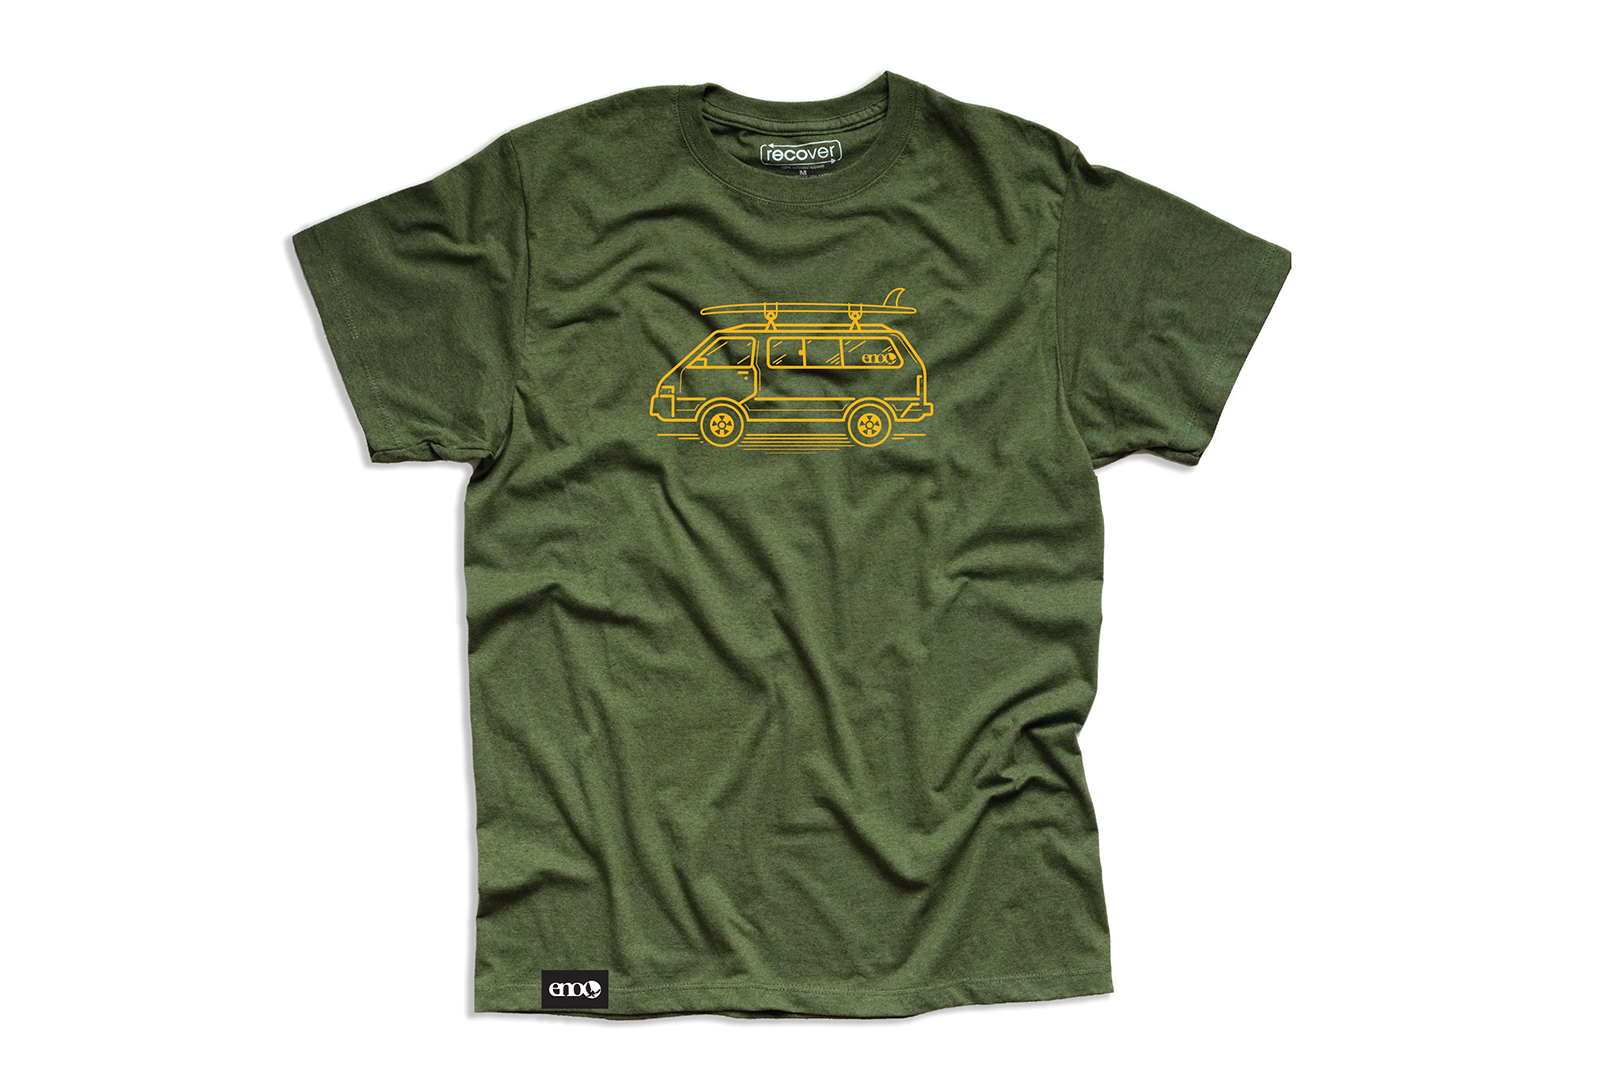 Eagles Nest Outfitters Accessories, ENO Men's Wayfarer Tee